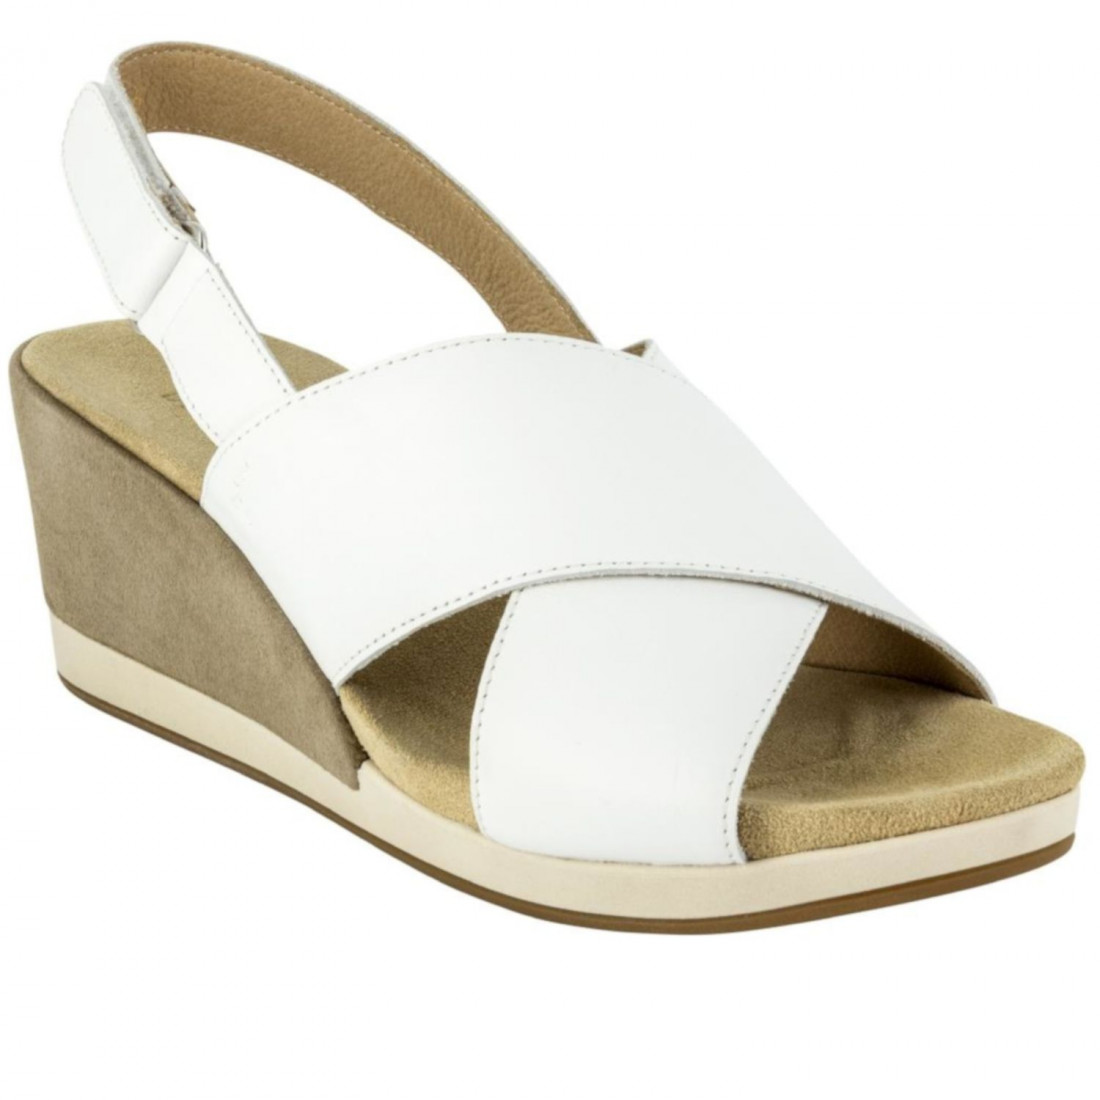 White and sandy Benvado Olivia wedge sandals